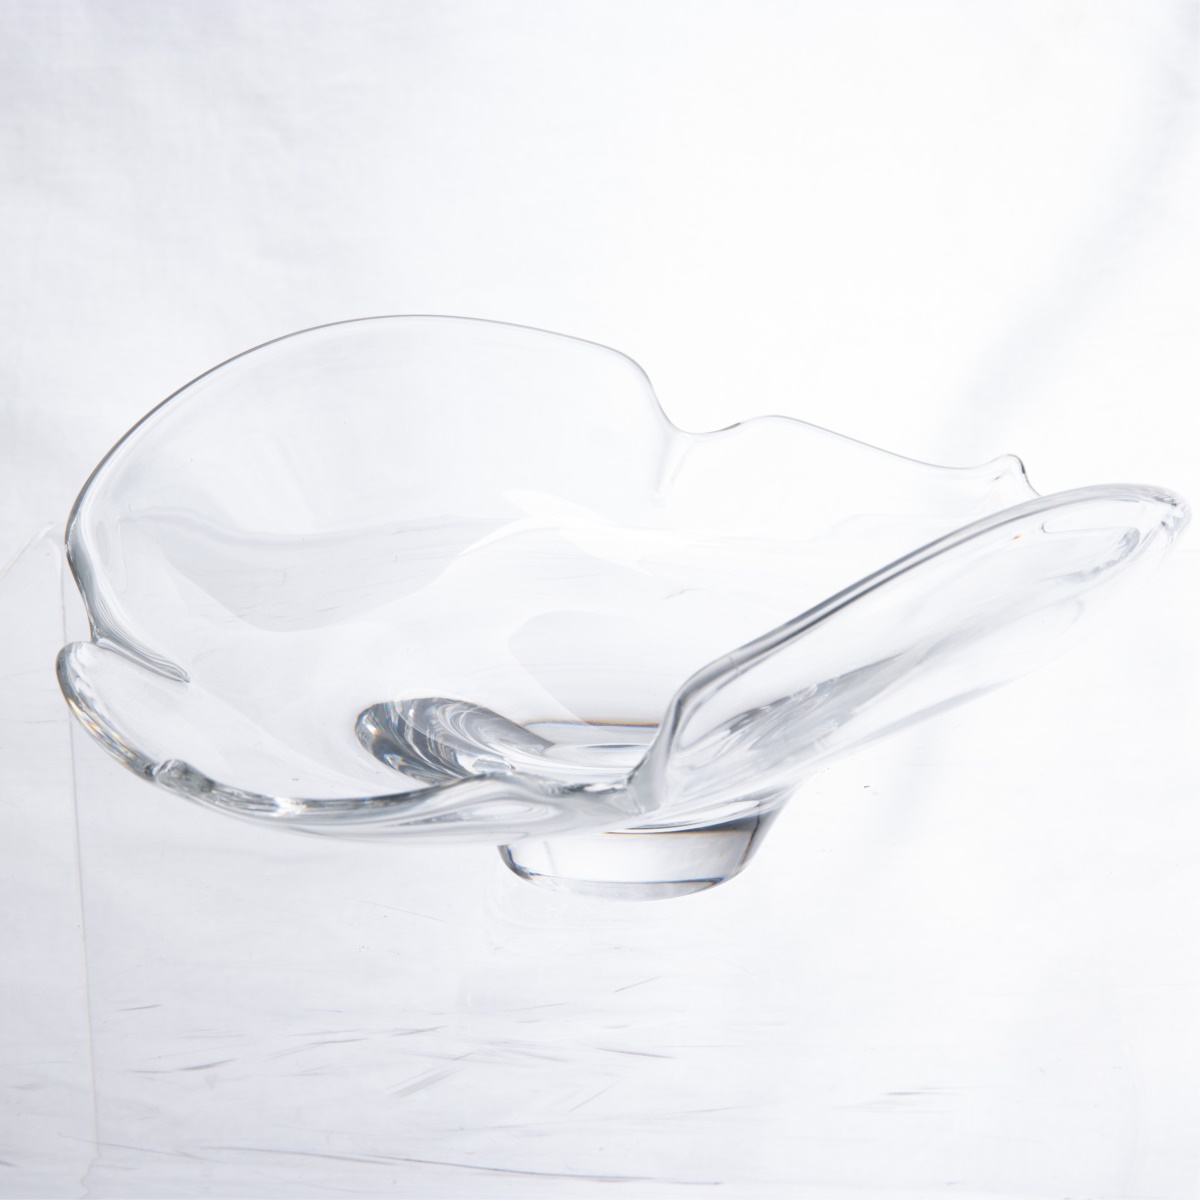 PAIR OF STEUBEN GLASS DISHES - Image 6 of 7